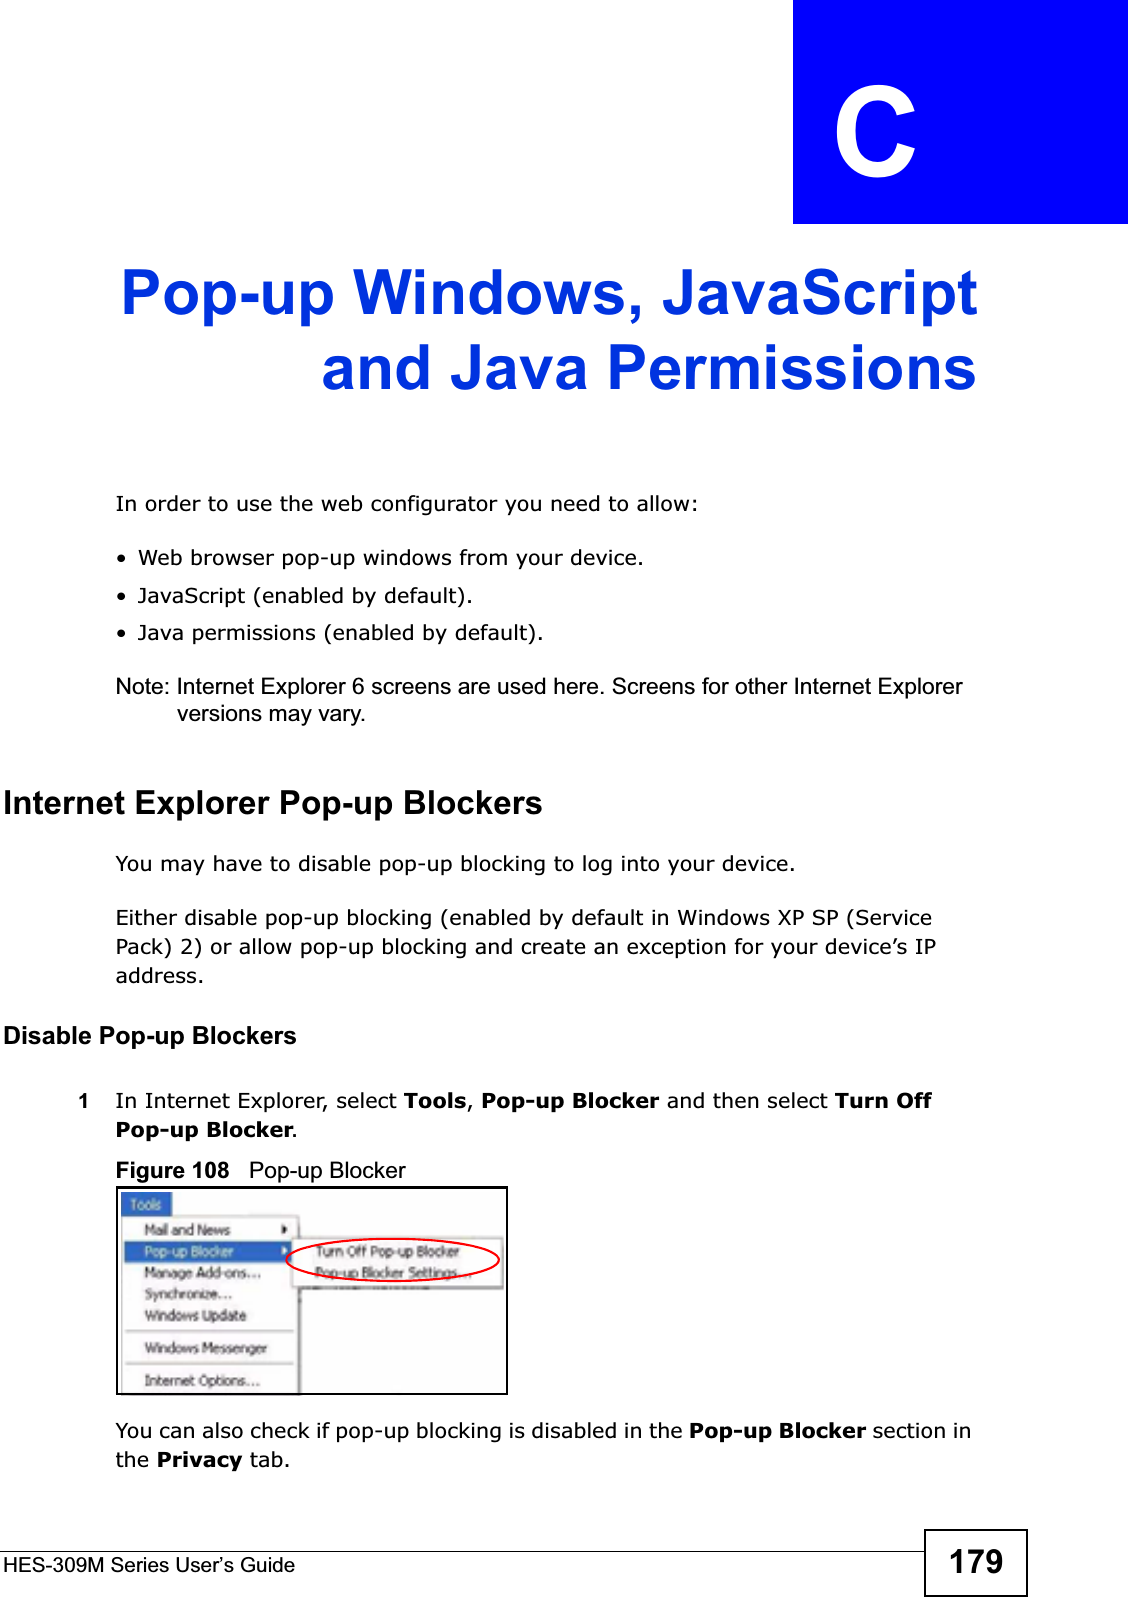 HES-309M Series User’s Guide 179APPENDIX  C Pop-up Windows, JavaScriptand Java PermissionsIn order to use the web configurator you need to allow:• Web browser pop-up windows from your device.• JavaScript (enabled by default).• Java permissions (enabled by default).Note: Internet Explorer 6 screens are used here. Screens for other Internet Explorer versions may vary.Internet Explorer Pop-up BlockersYou may have to disable pop-up blocking to log into your device. Either disable pop-up blocking (enabled by default in Windows XP SP (Service Pack) 2) or allow pop-up blocking and create an exception for your device’s IP address.Disable Pop-up Blockers1In Internet Explorer, select Tools,Pop-up Blocker and then select Turn Off Pop-up Blocker.Figure 108   Pop-up BlockerYou can also check if pop-up blocking is disabled in the Pop-up Blocker section in the Privacy tab. 